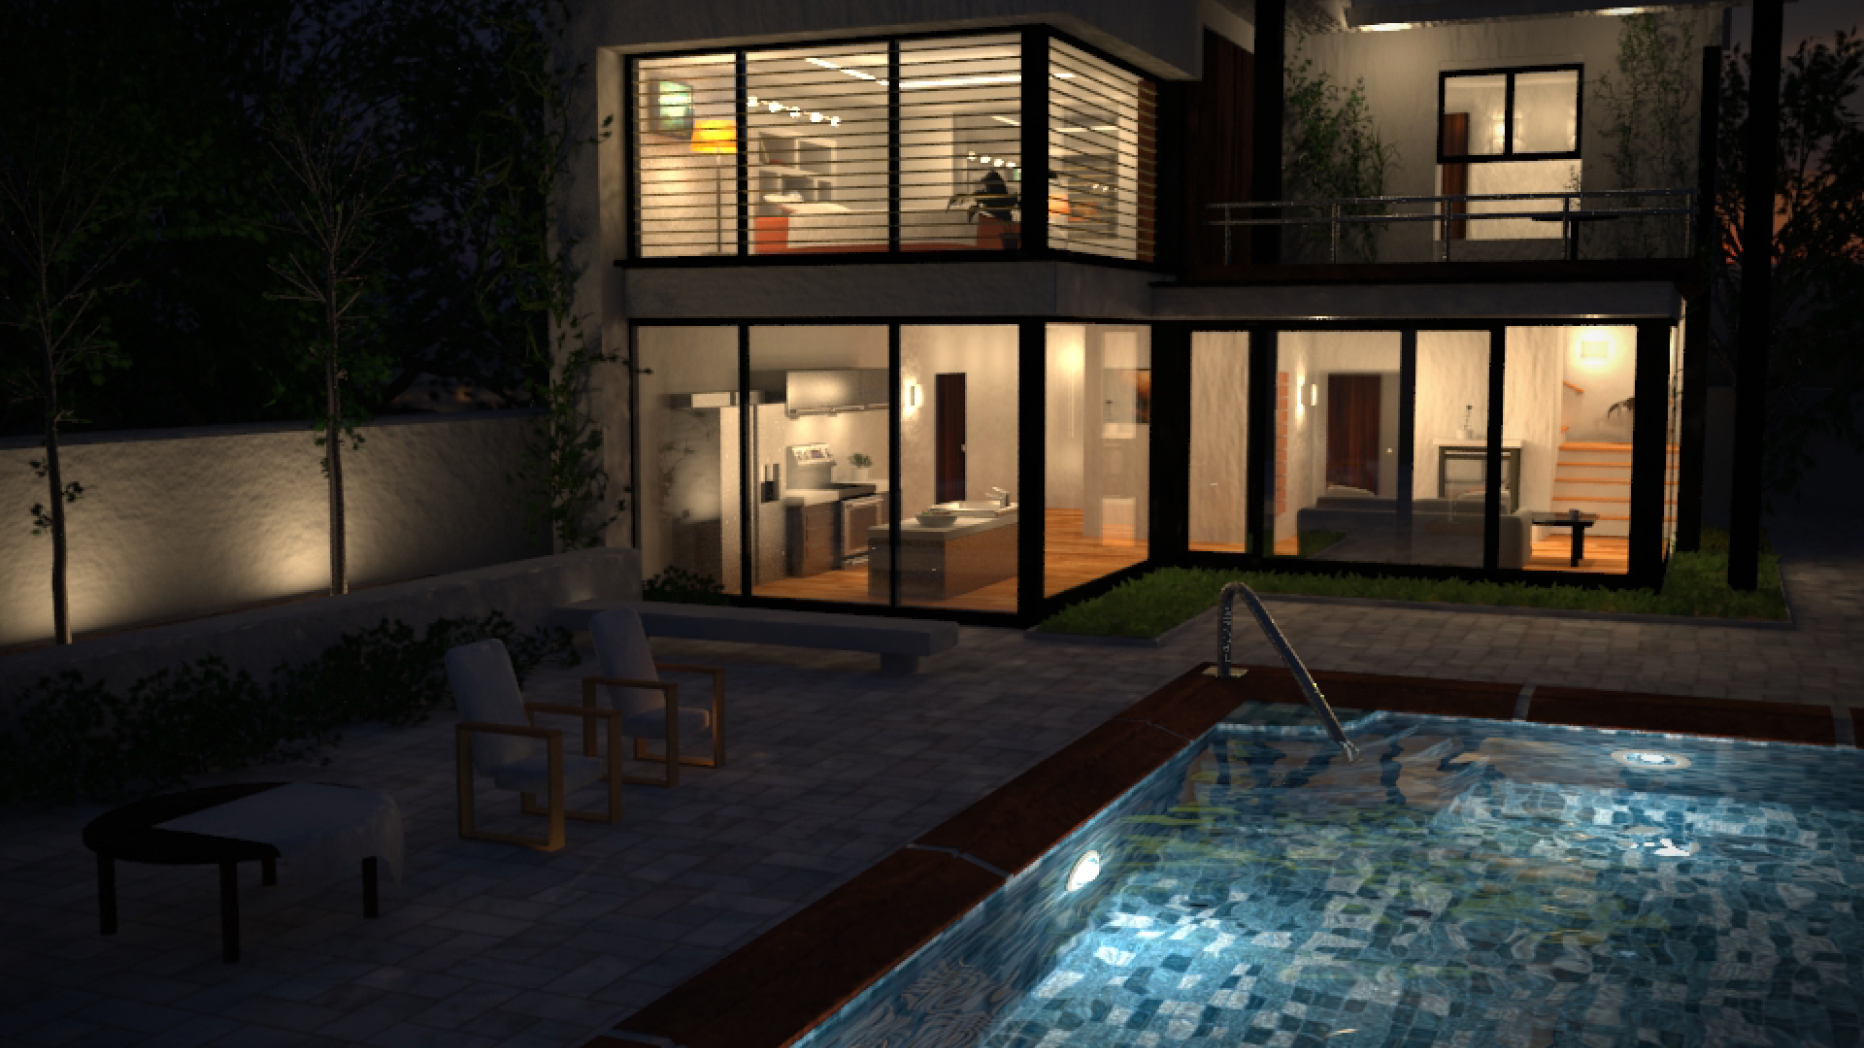 CGI graphic of a house many large windows and a pool in front. 